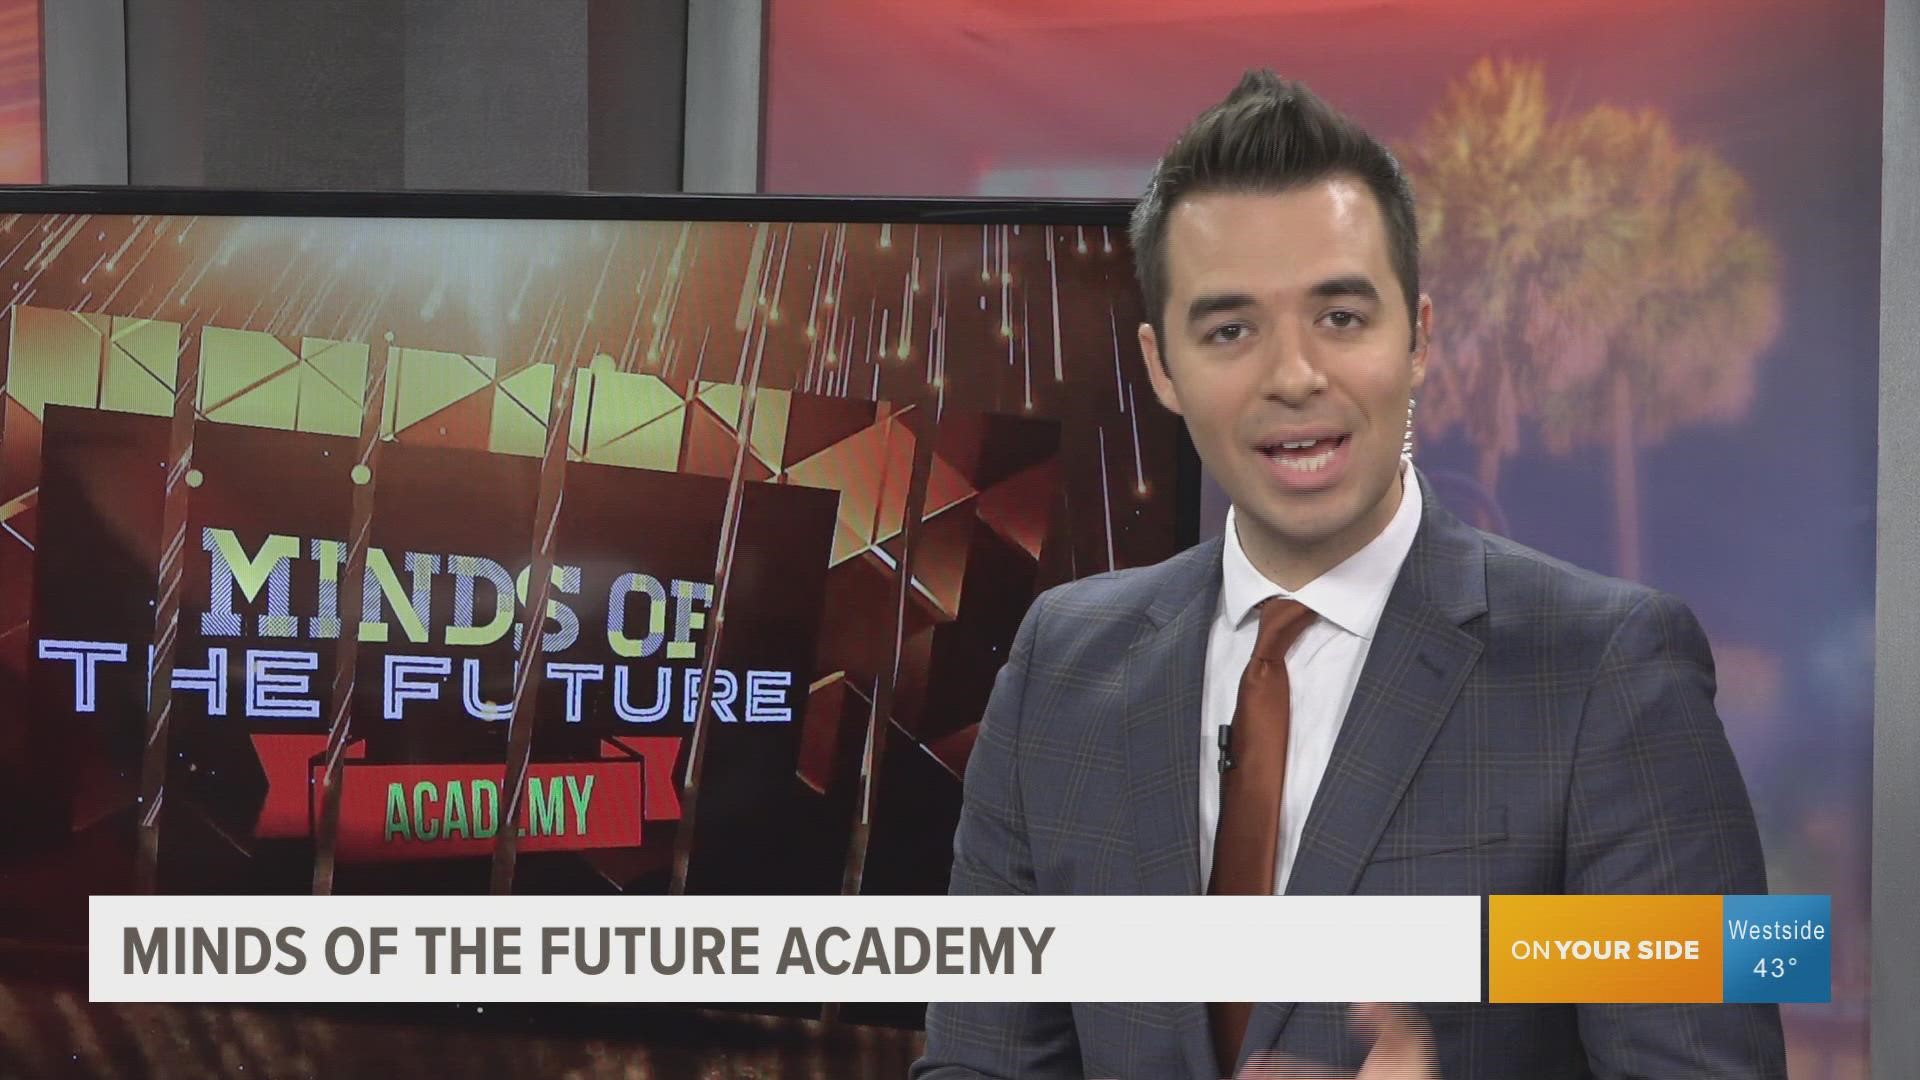 Minds of the Future wakes up early with GMJ to explain the impact the academy has had on the community.